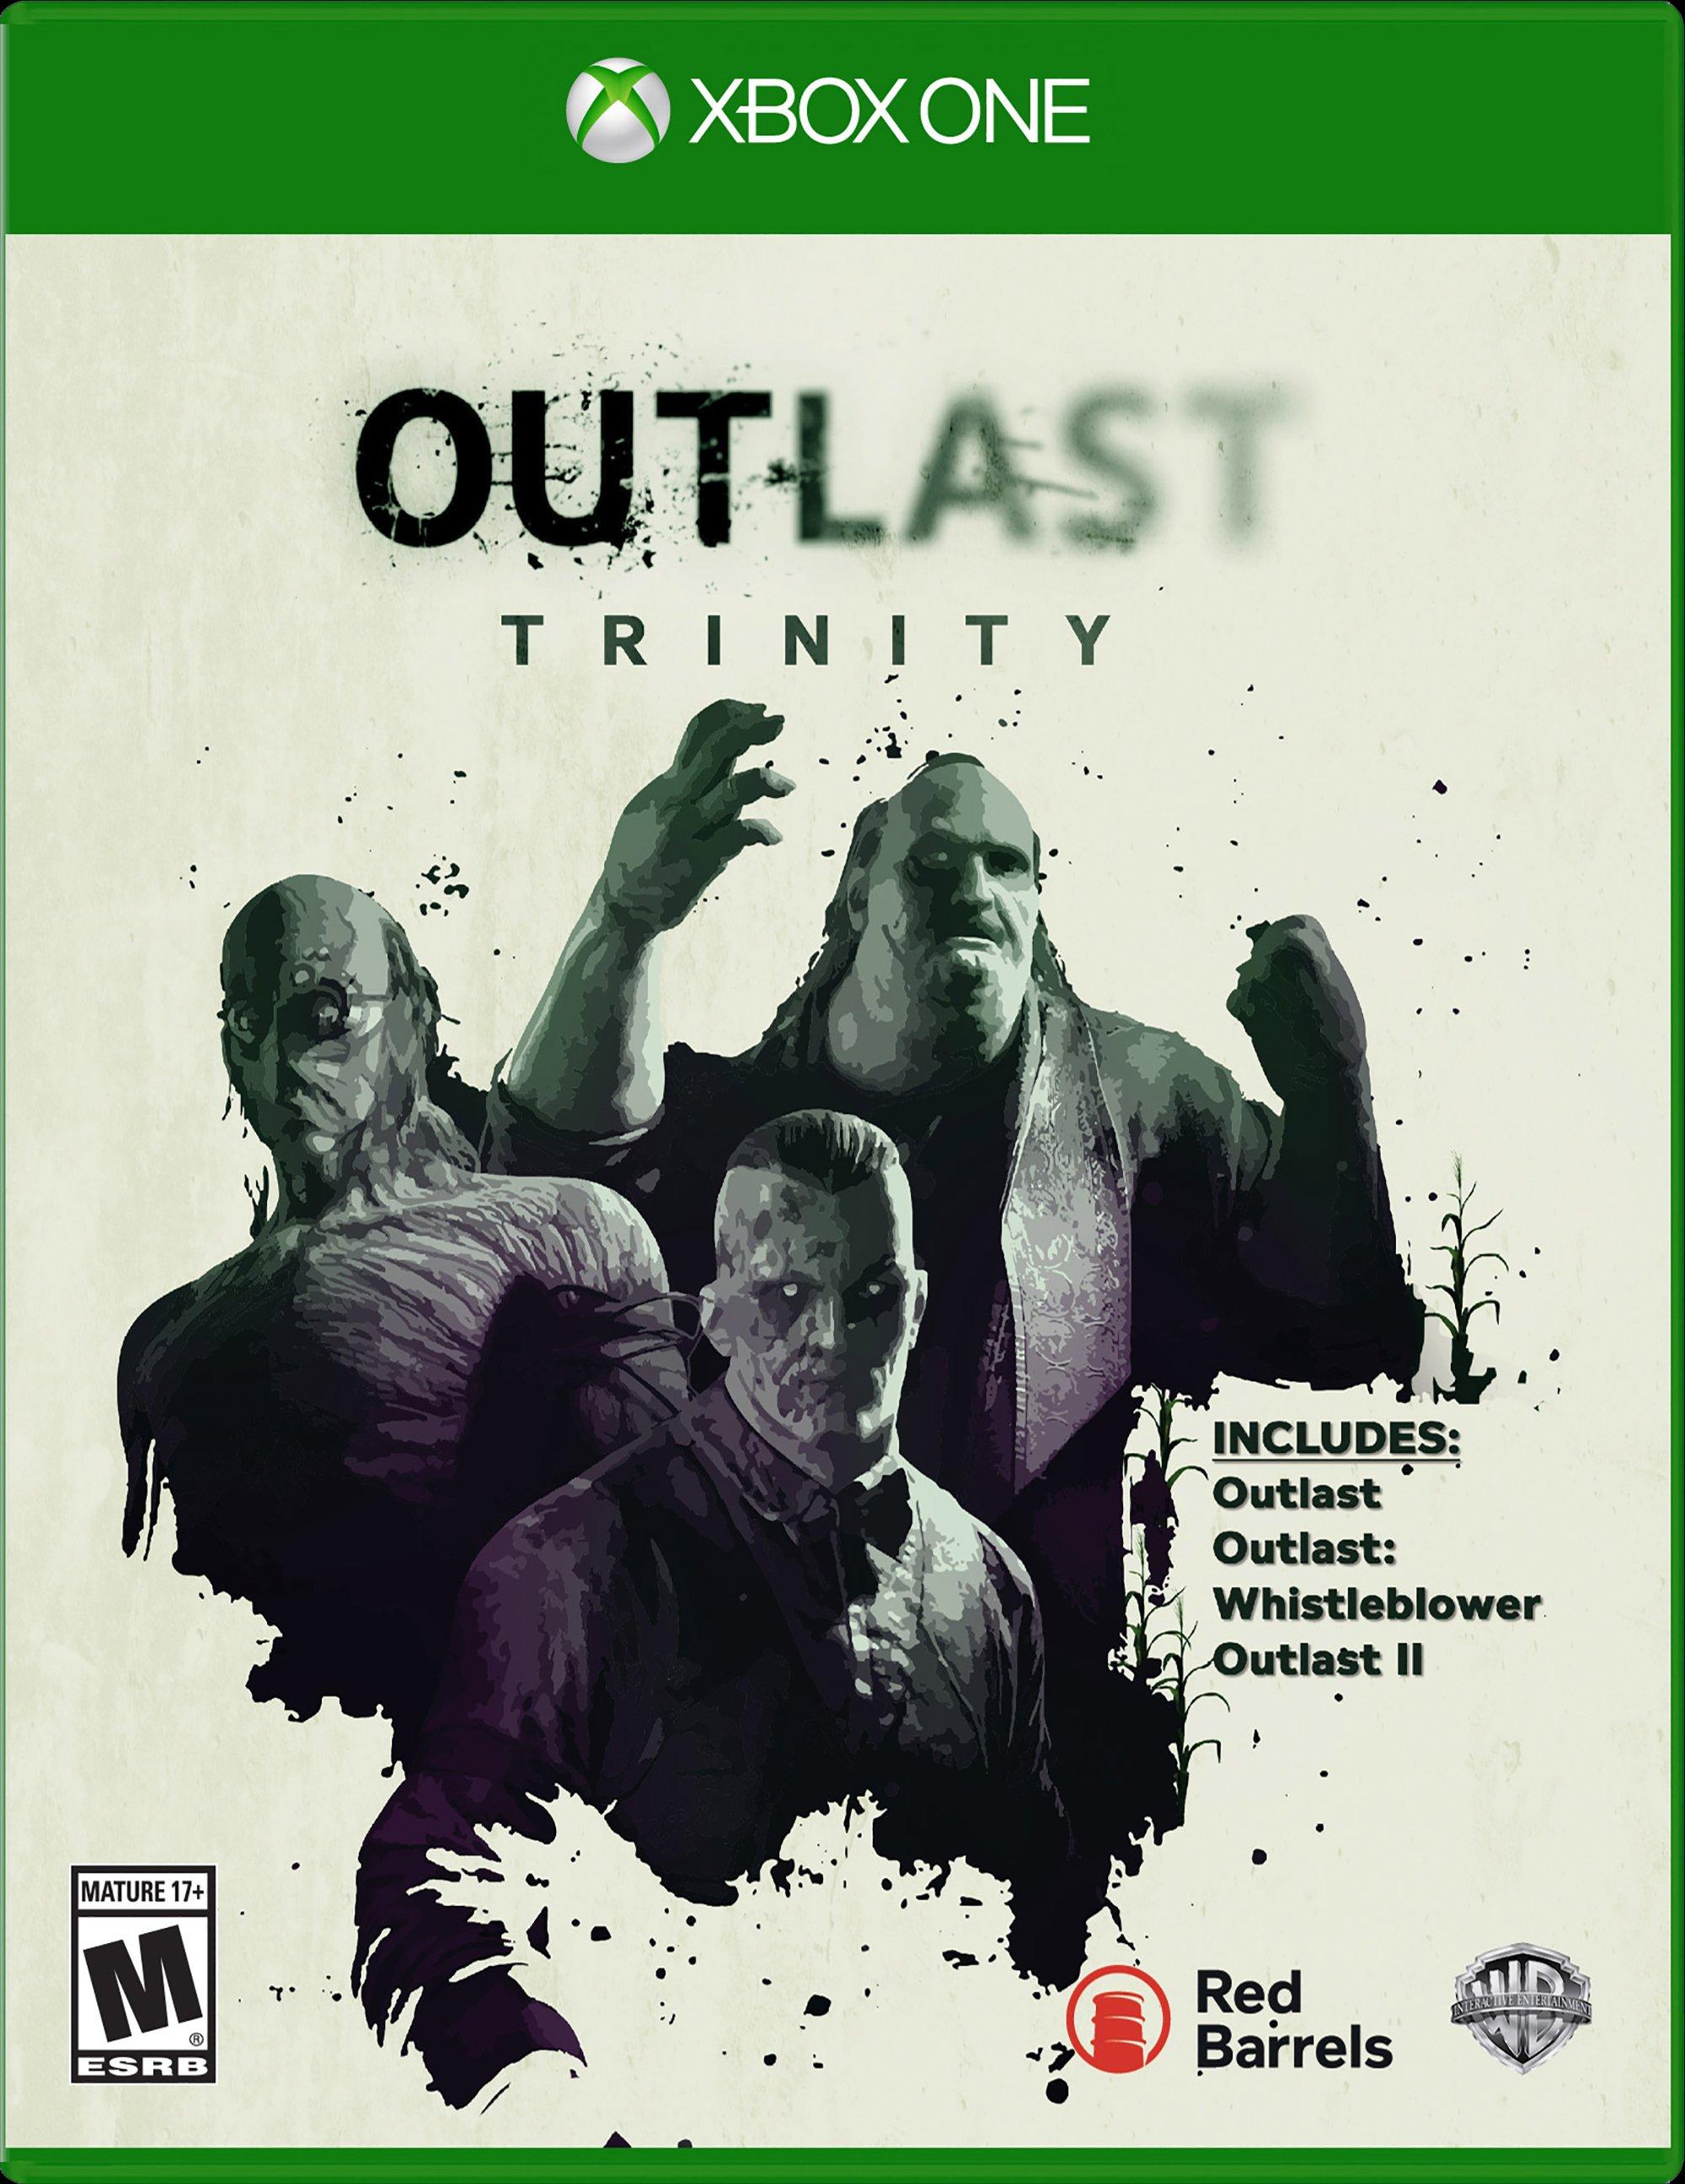 The Outlast Trials is Coming to Consoles - Insider Gaming